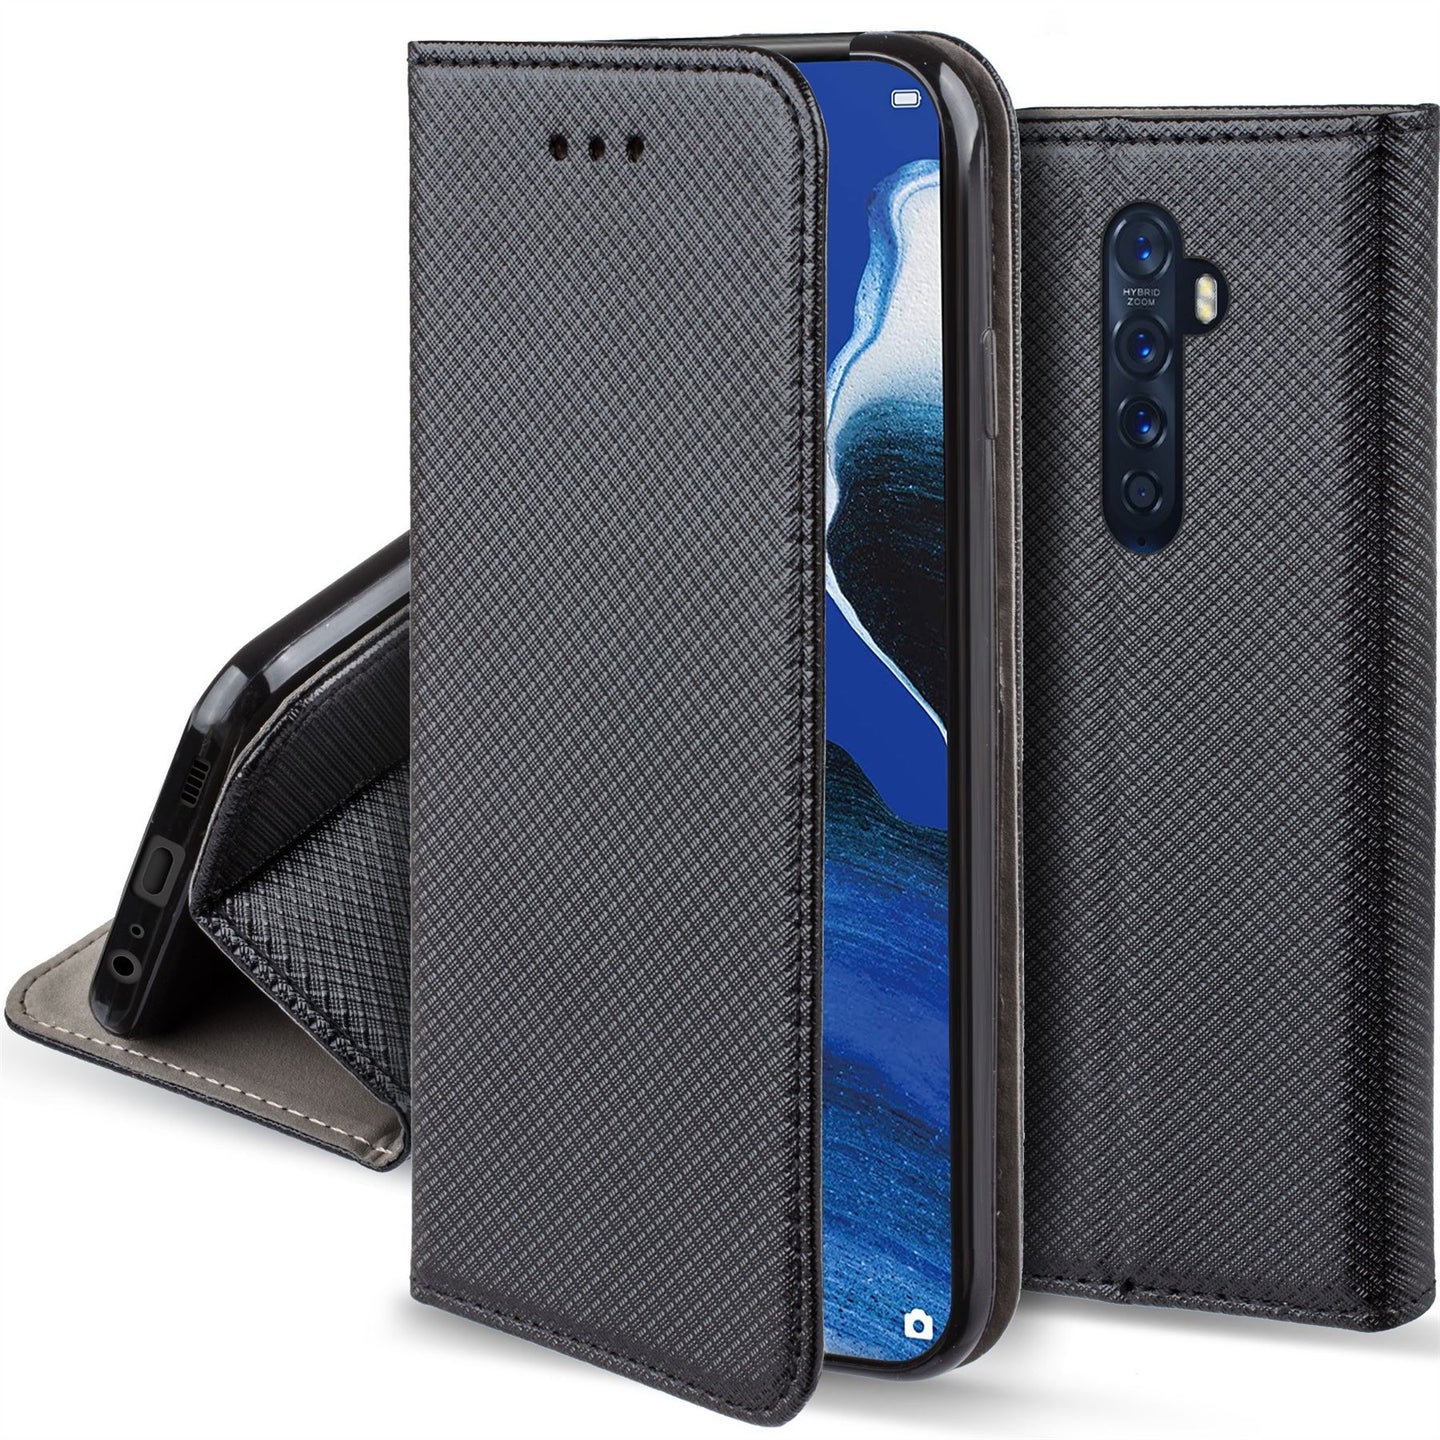 Moozy Case Flip Cover for Oppo Reno 2, Black - Smart Magnetic Flip Case with Card Holder and Stand